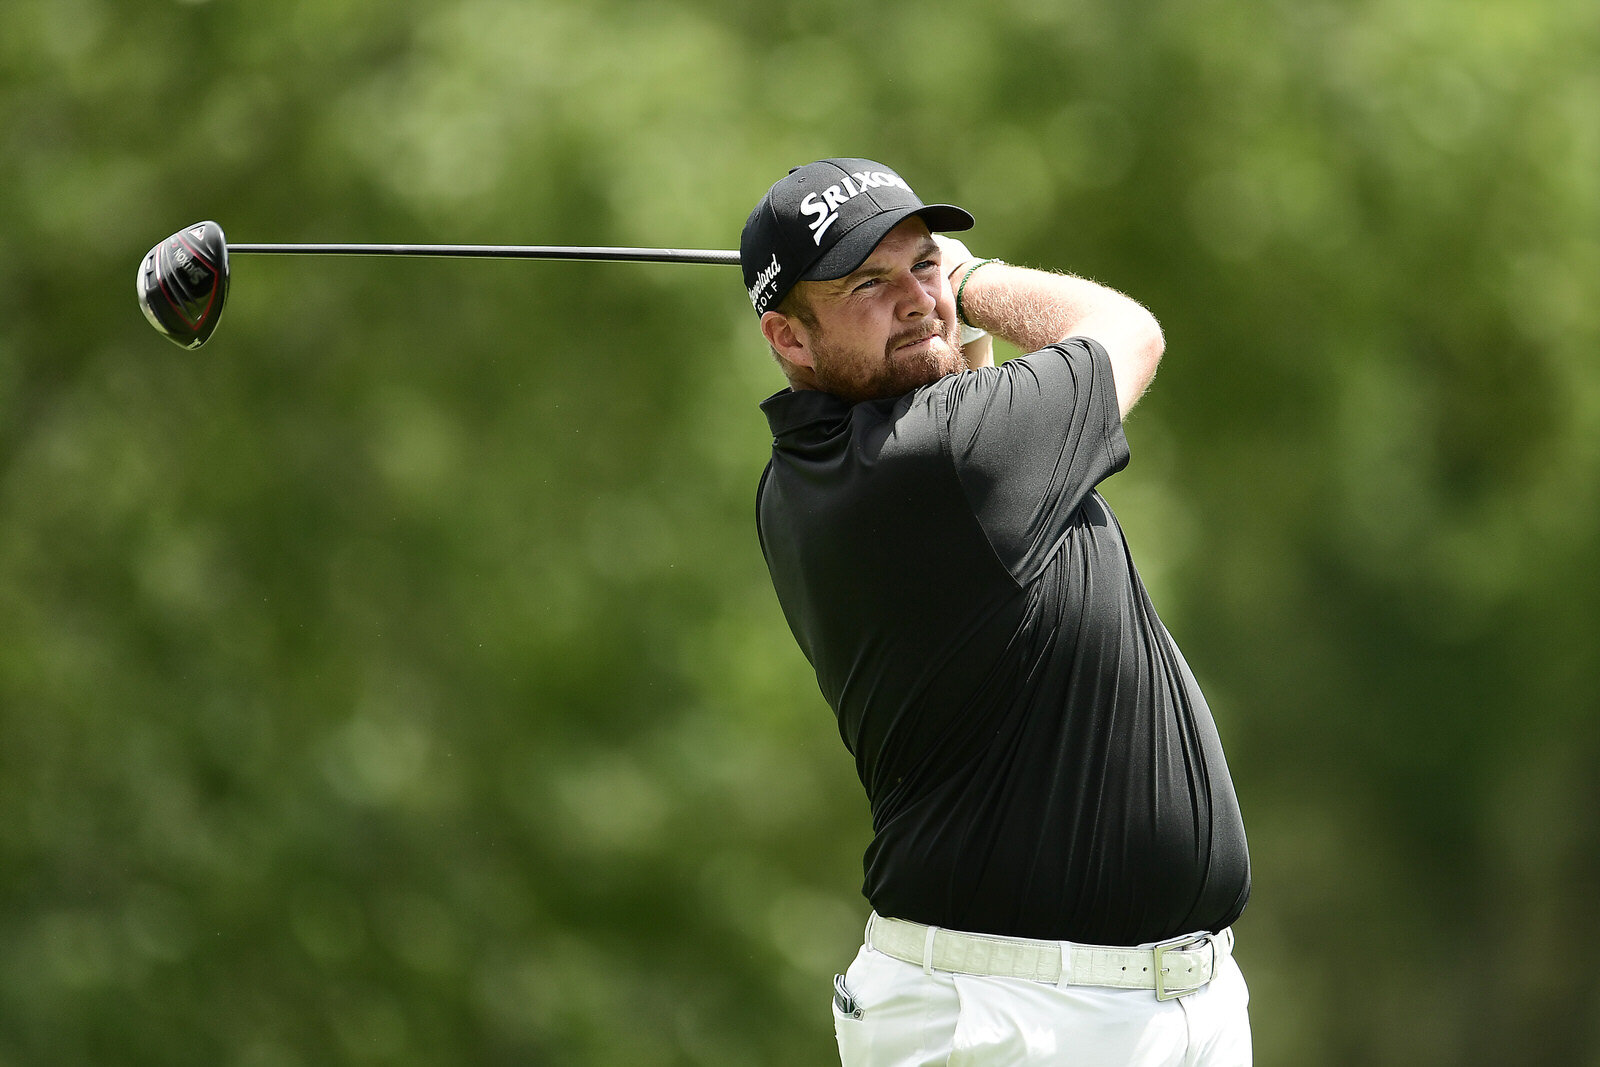  MEMPHIS, TENNESSEE - AUGUST 02:  Shane Lowry of Ireland plays his shot from the second tee during the final round of the World Golf Championship-FedEx St Jude Invitational at TPC Southwind on August 02, 2020 in Memphis, Tennessee. (Photo by Stacy Re